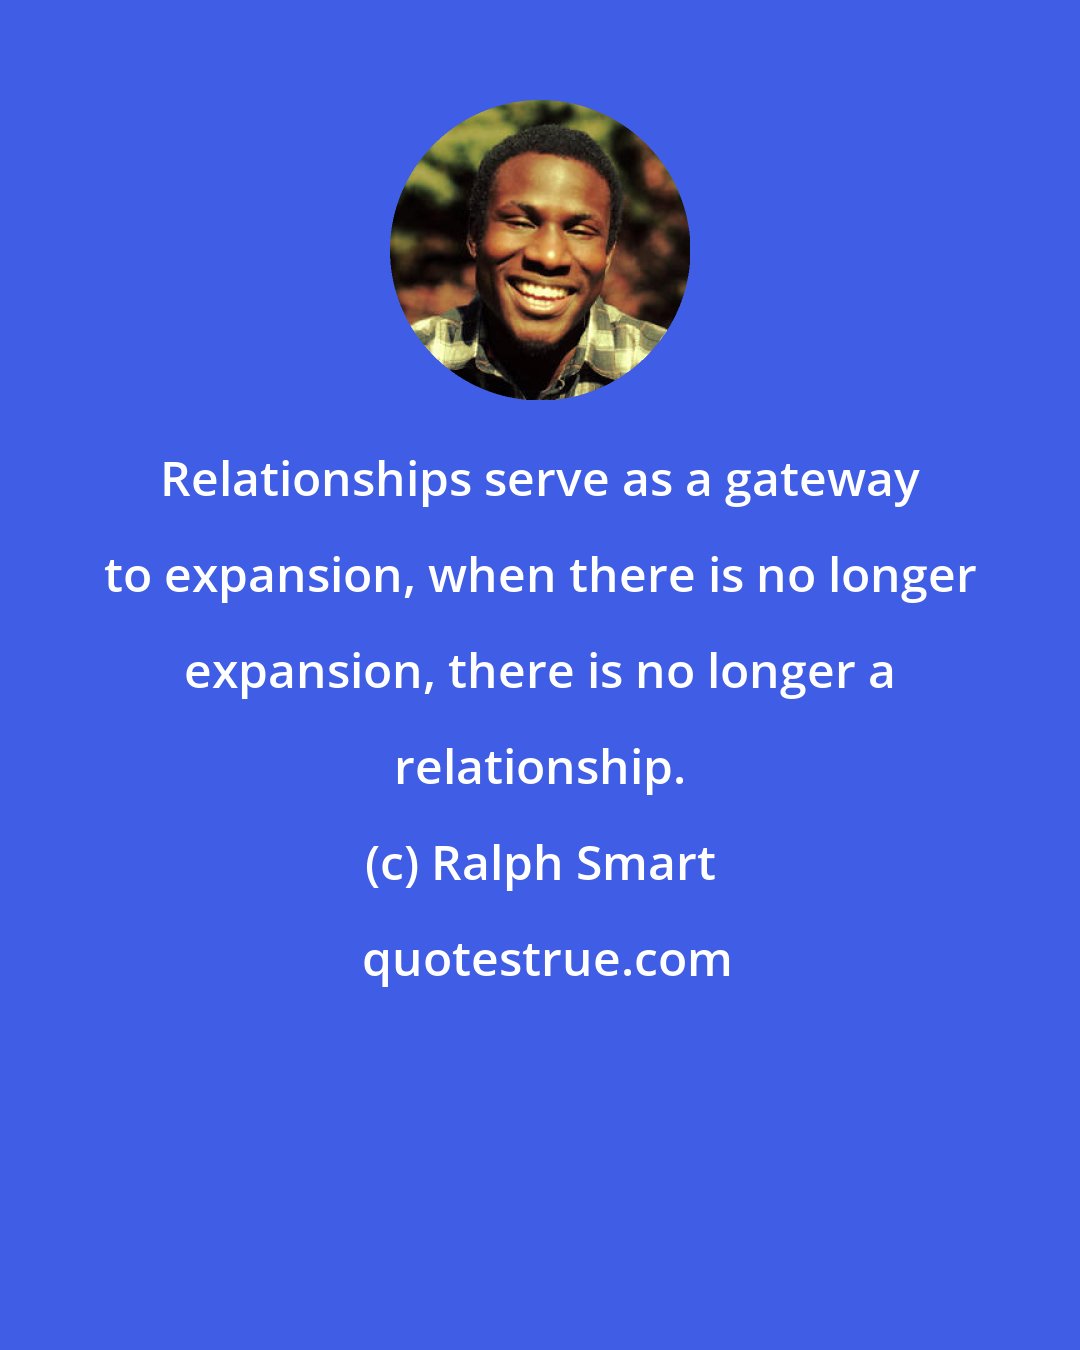 Ralph Smart: Relationships serve as a gateway to expansion, when there is no longer expansion, there is no longer a relationship.